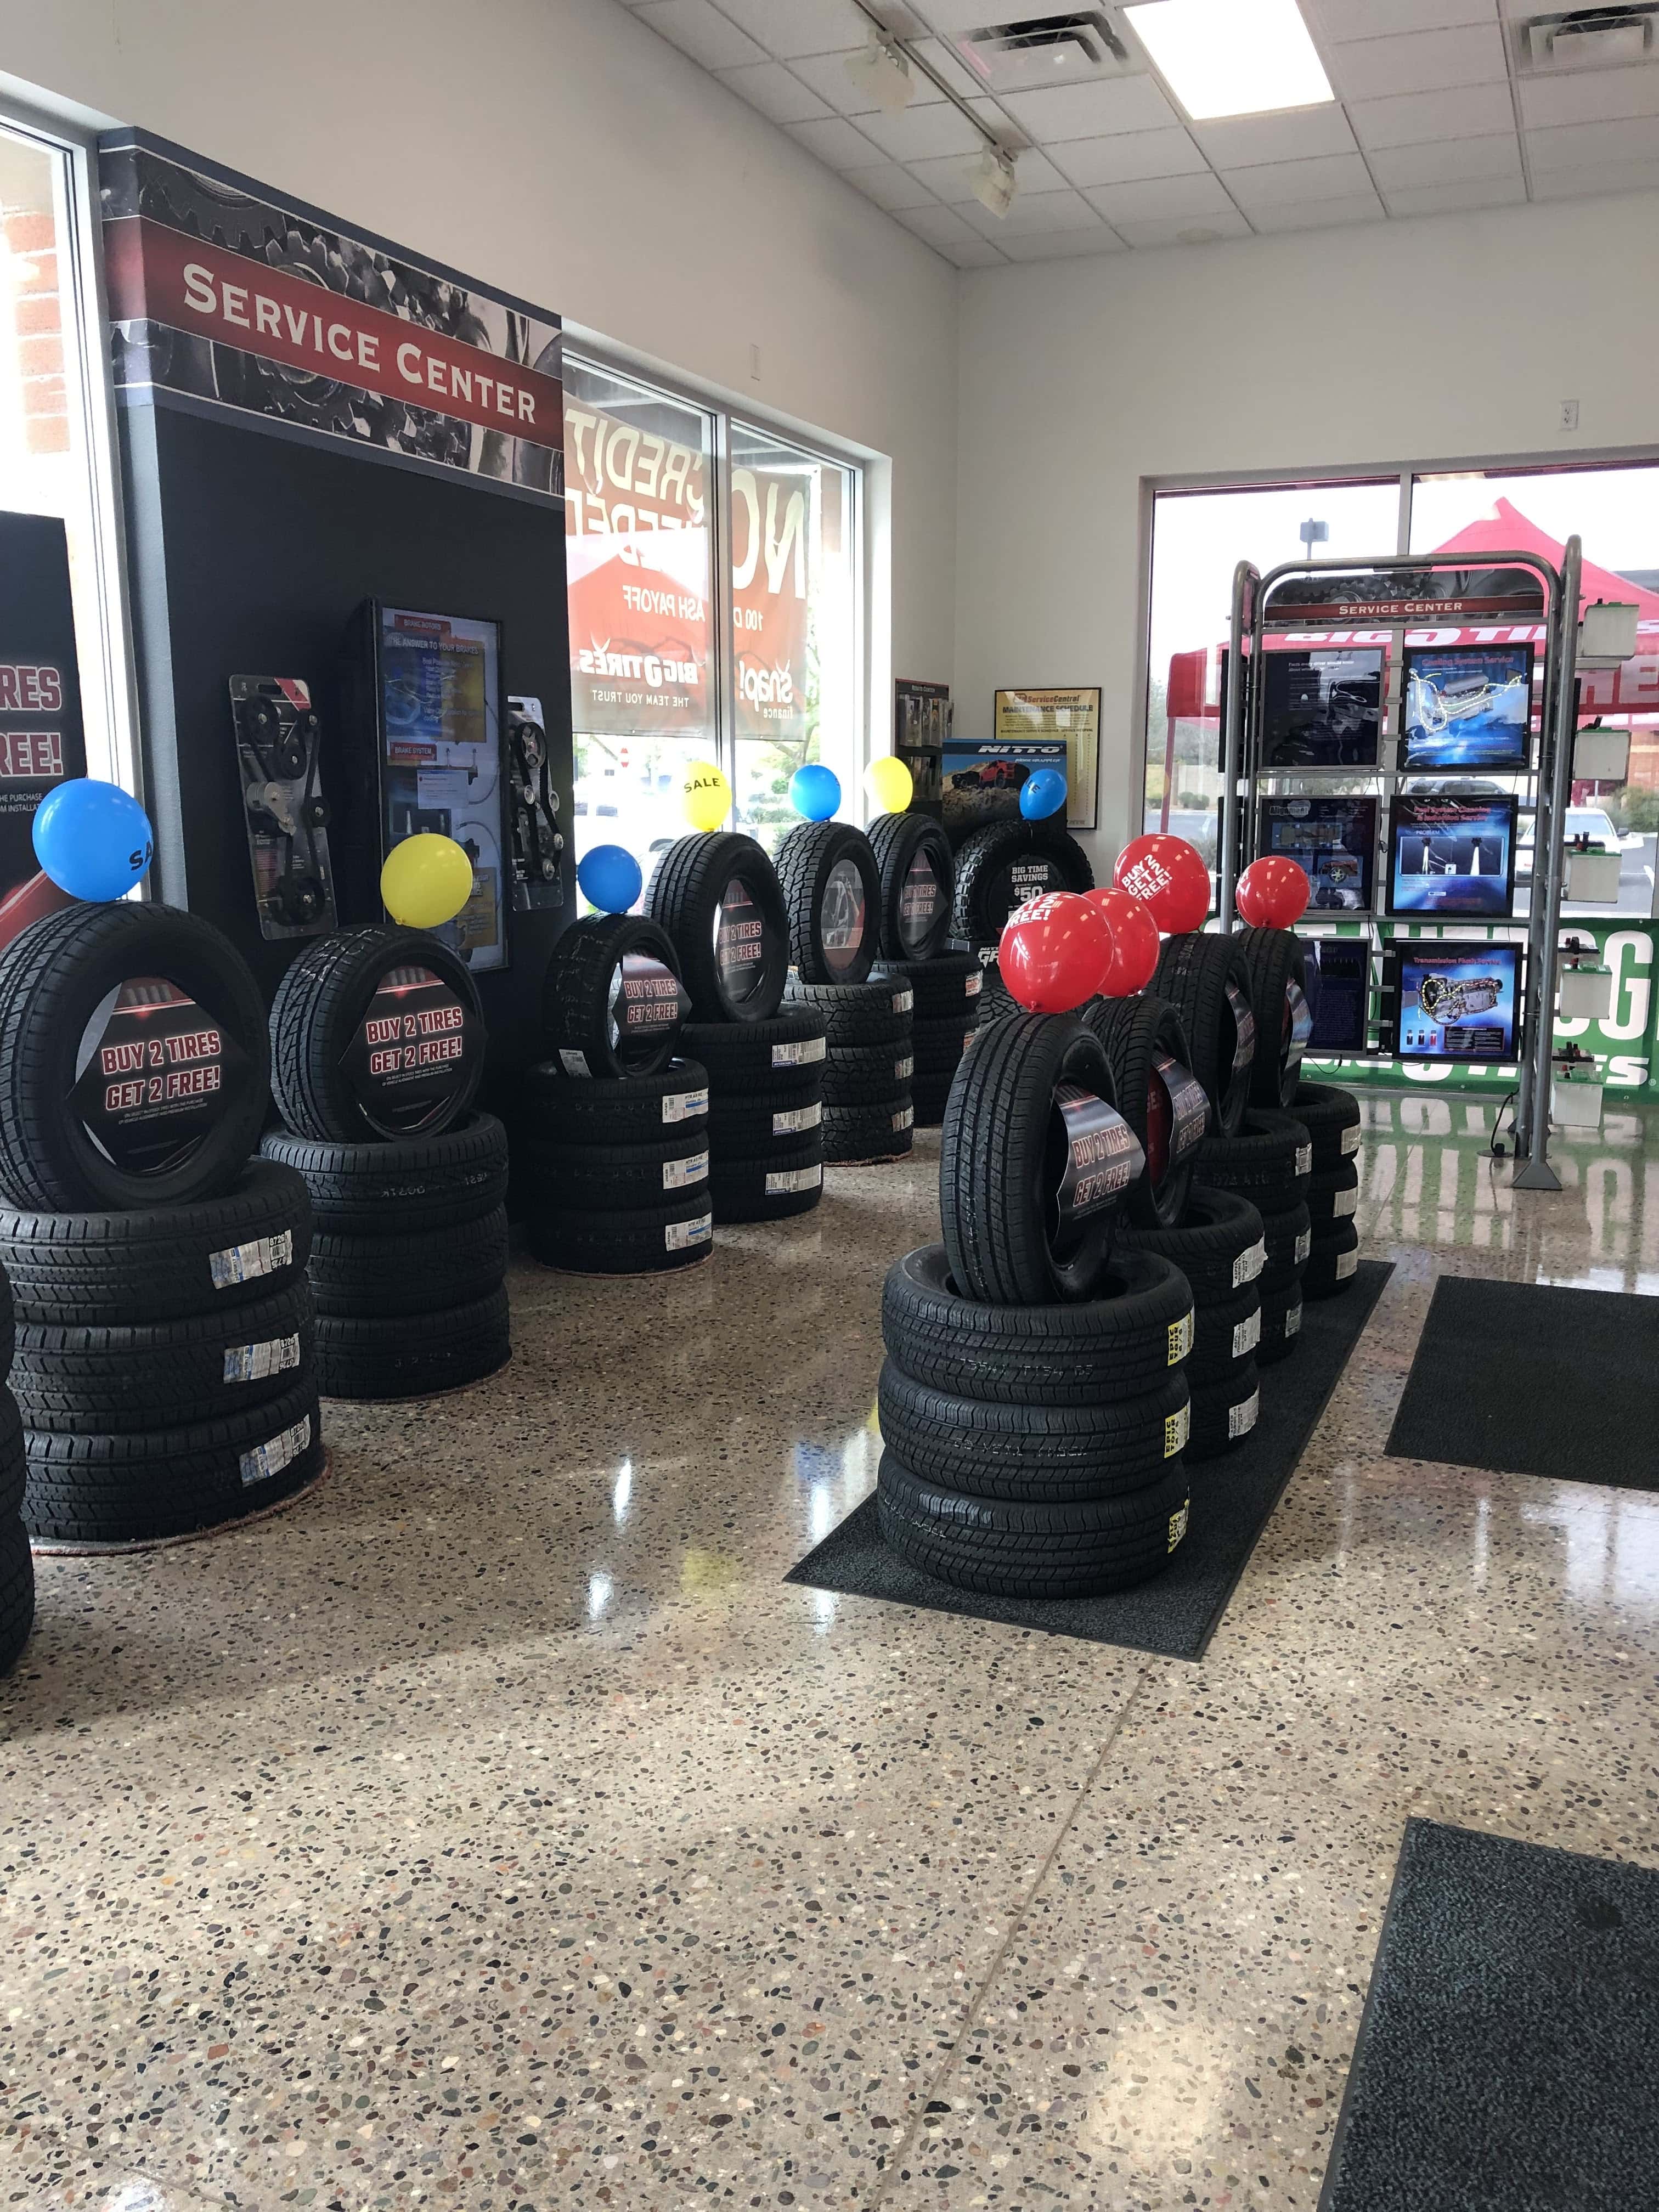 Big O Tires - Goodyear, US, tire service